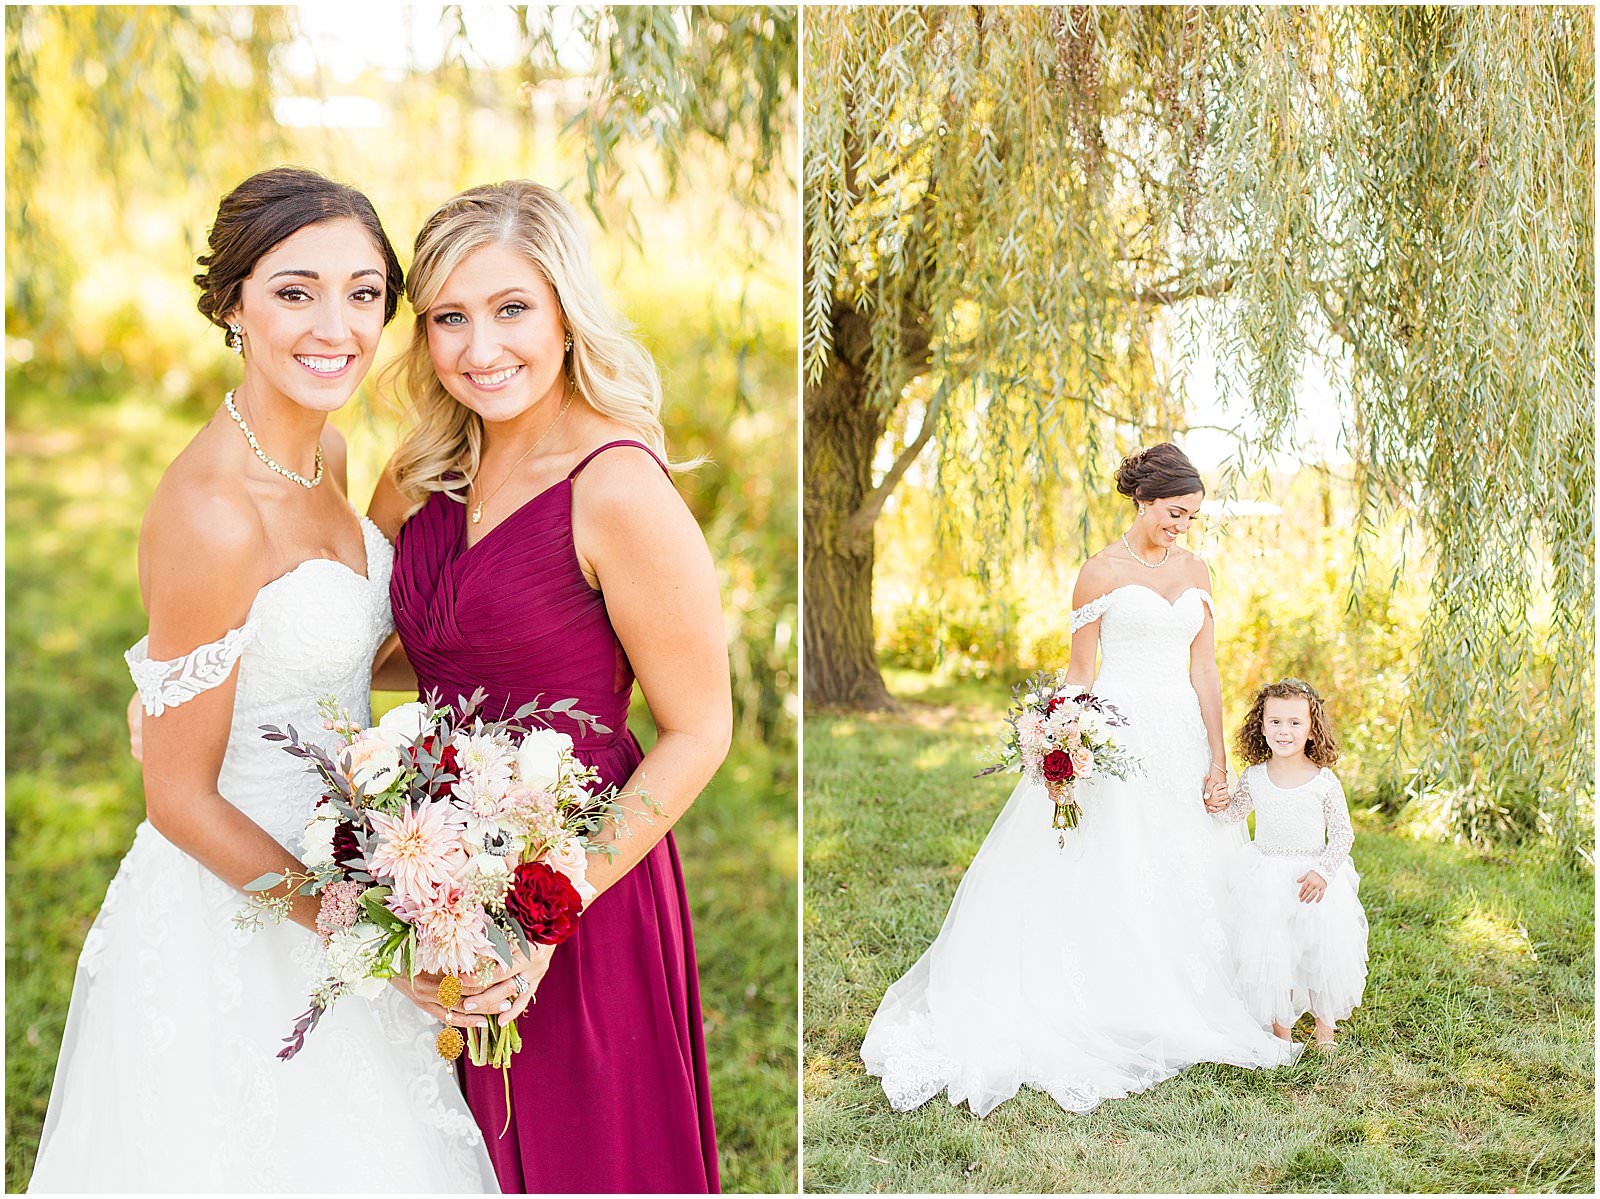 A Stunning Fall Wedding in Indianapolis, IN |. Sally and Andrew | Bret and Brandie Photography 0085.jpg